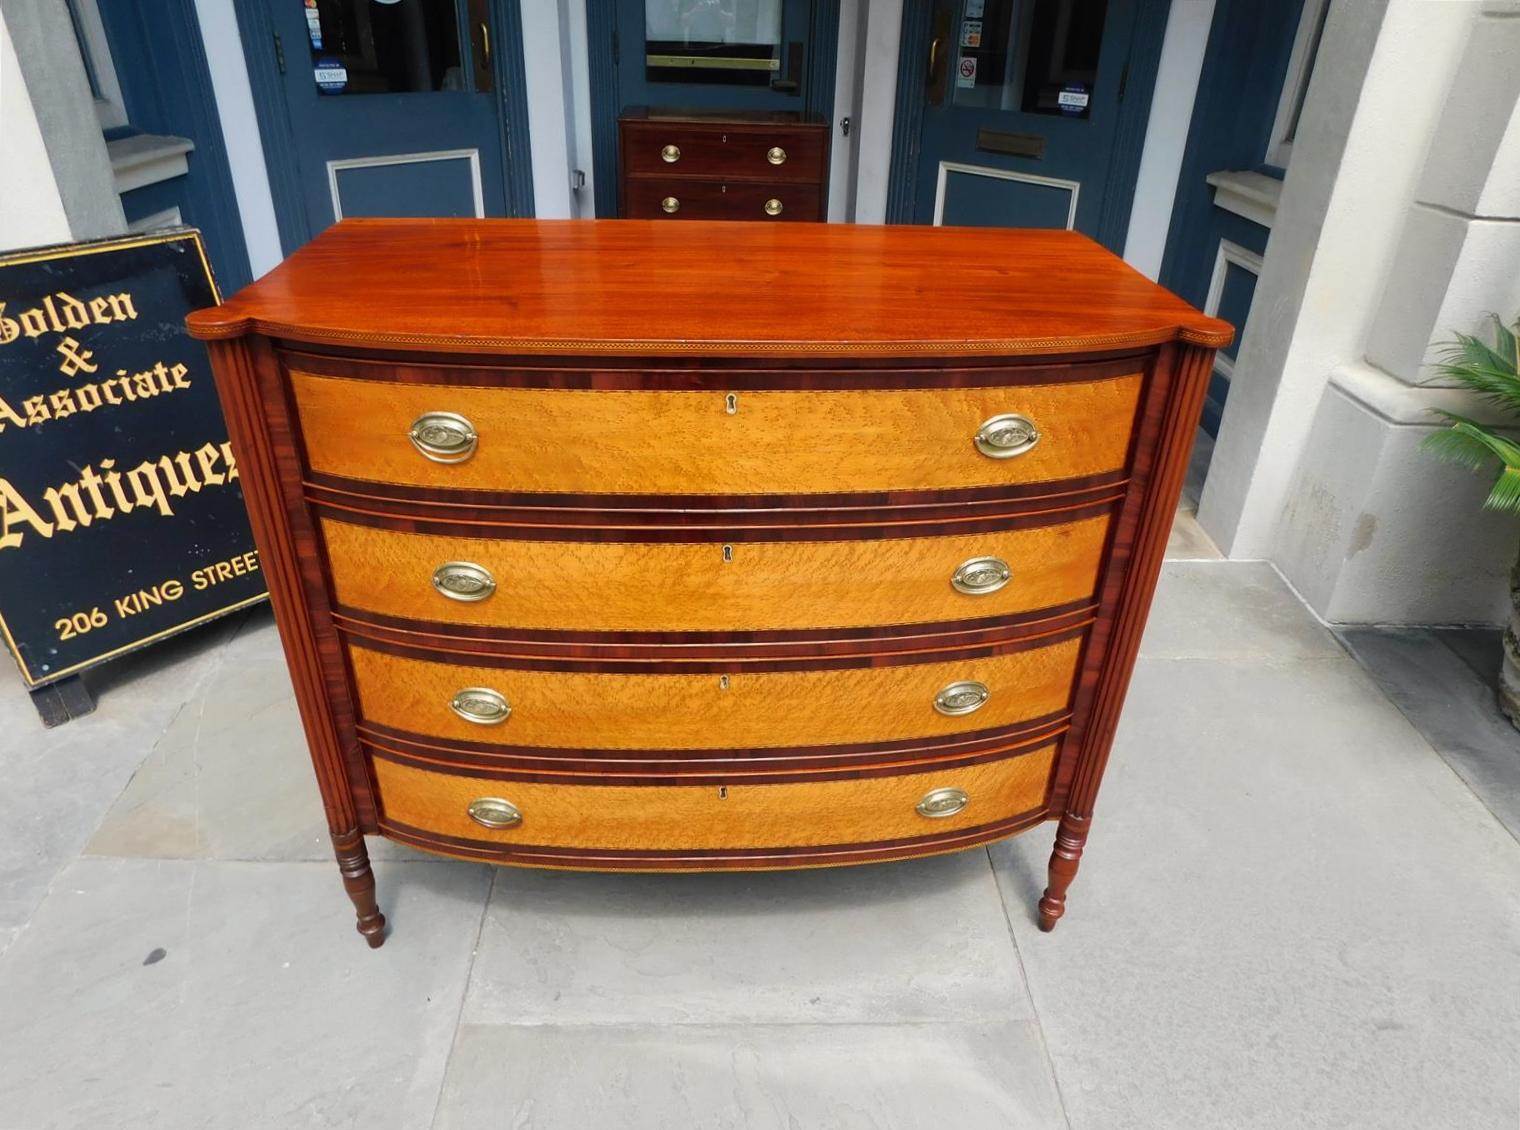 Early 19th Century American Sheraton Mahogany and Birdseye Maple Graduated Chest of Drawers C. 1810